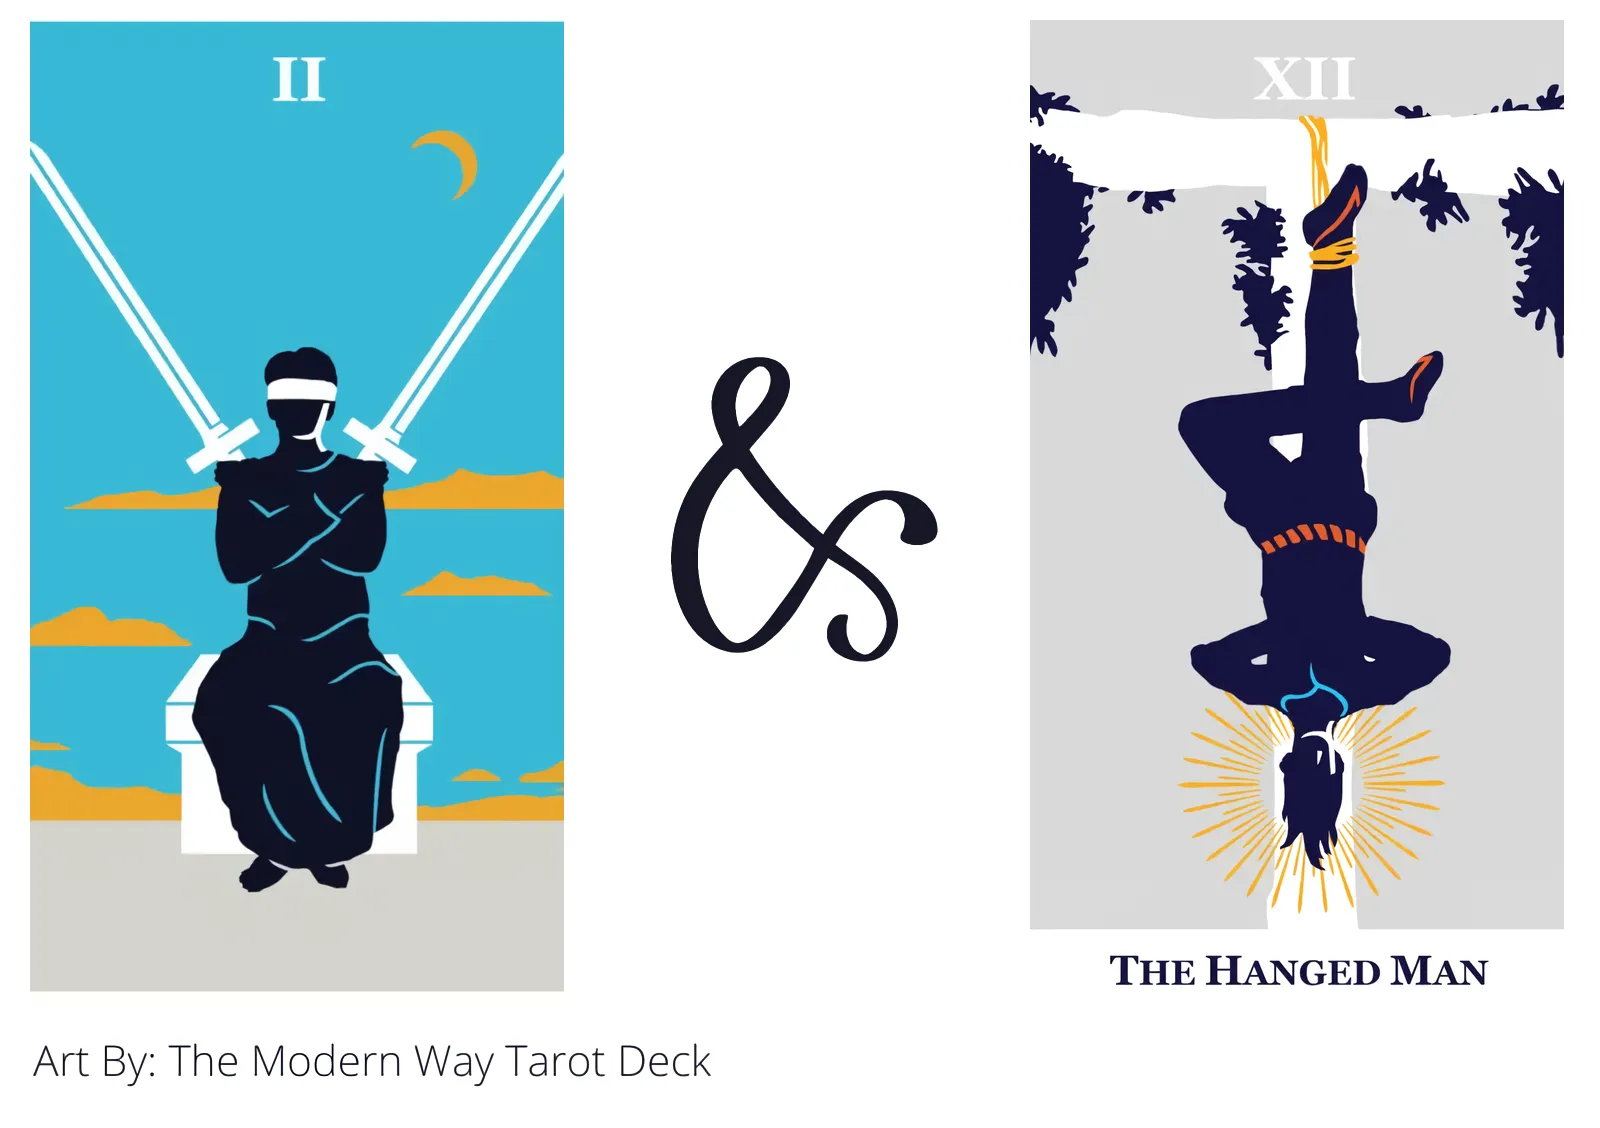 two of swords and the hanged man tarot cards together